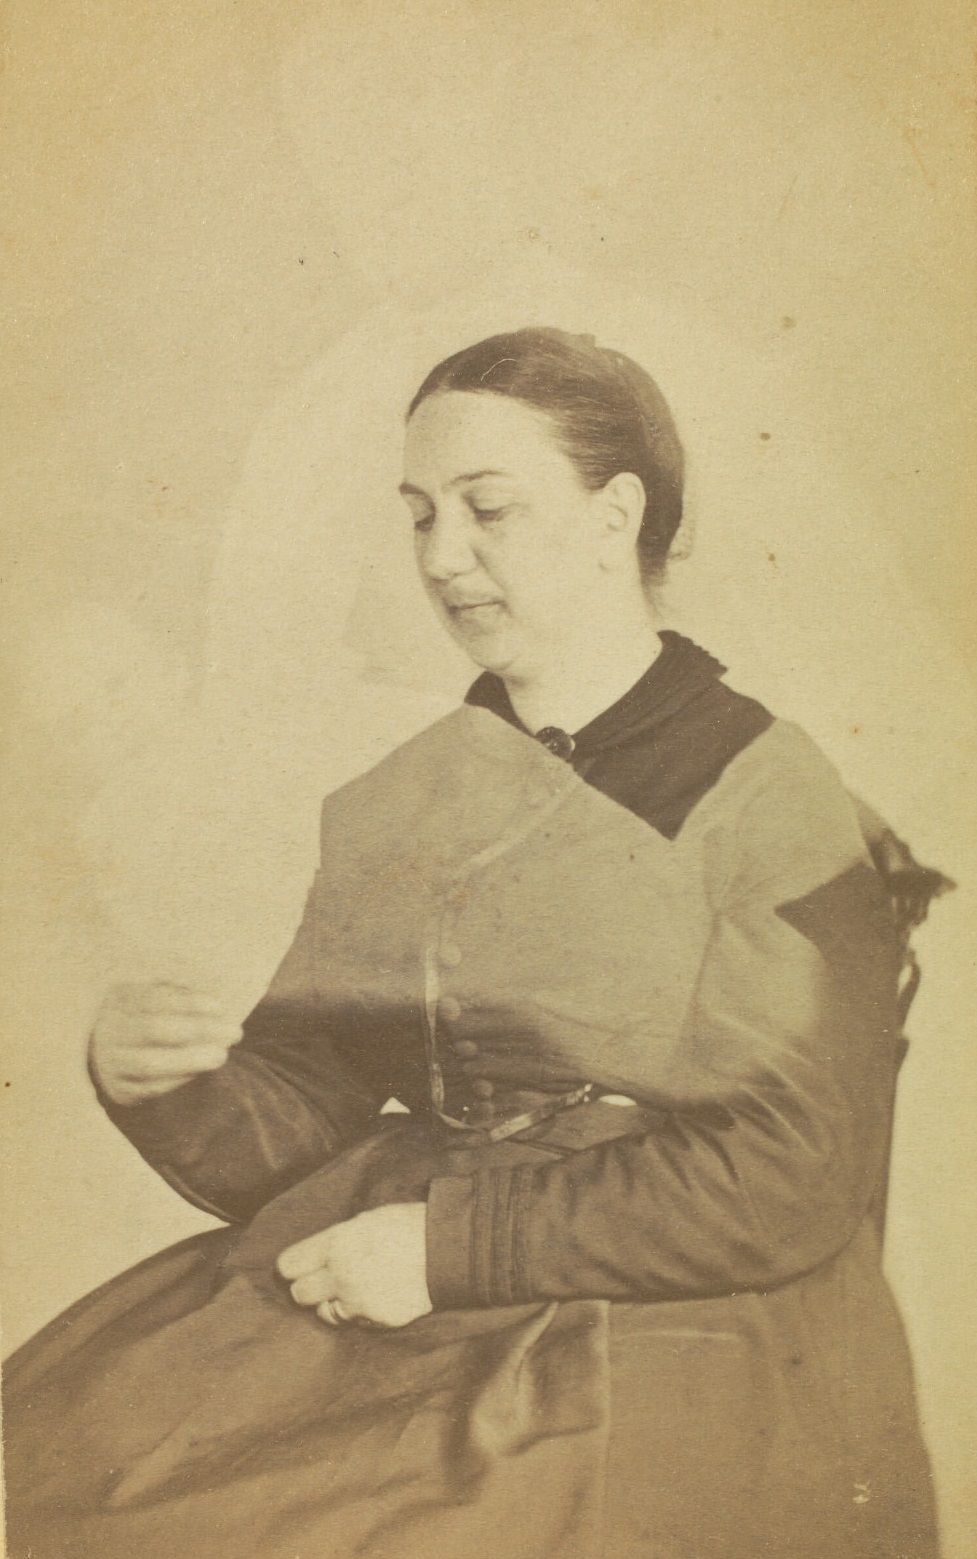 Portrait of Mrs. H.B. Sawyer, looking down at her hand. The faint image of a person is visible above her, with the faint image of a baby across her.